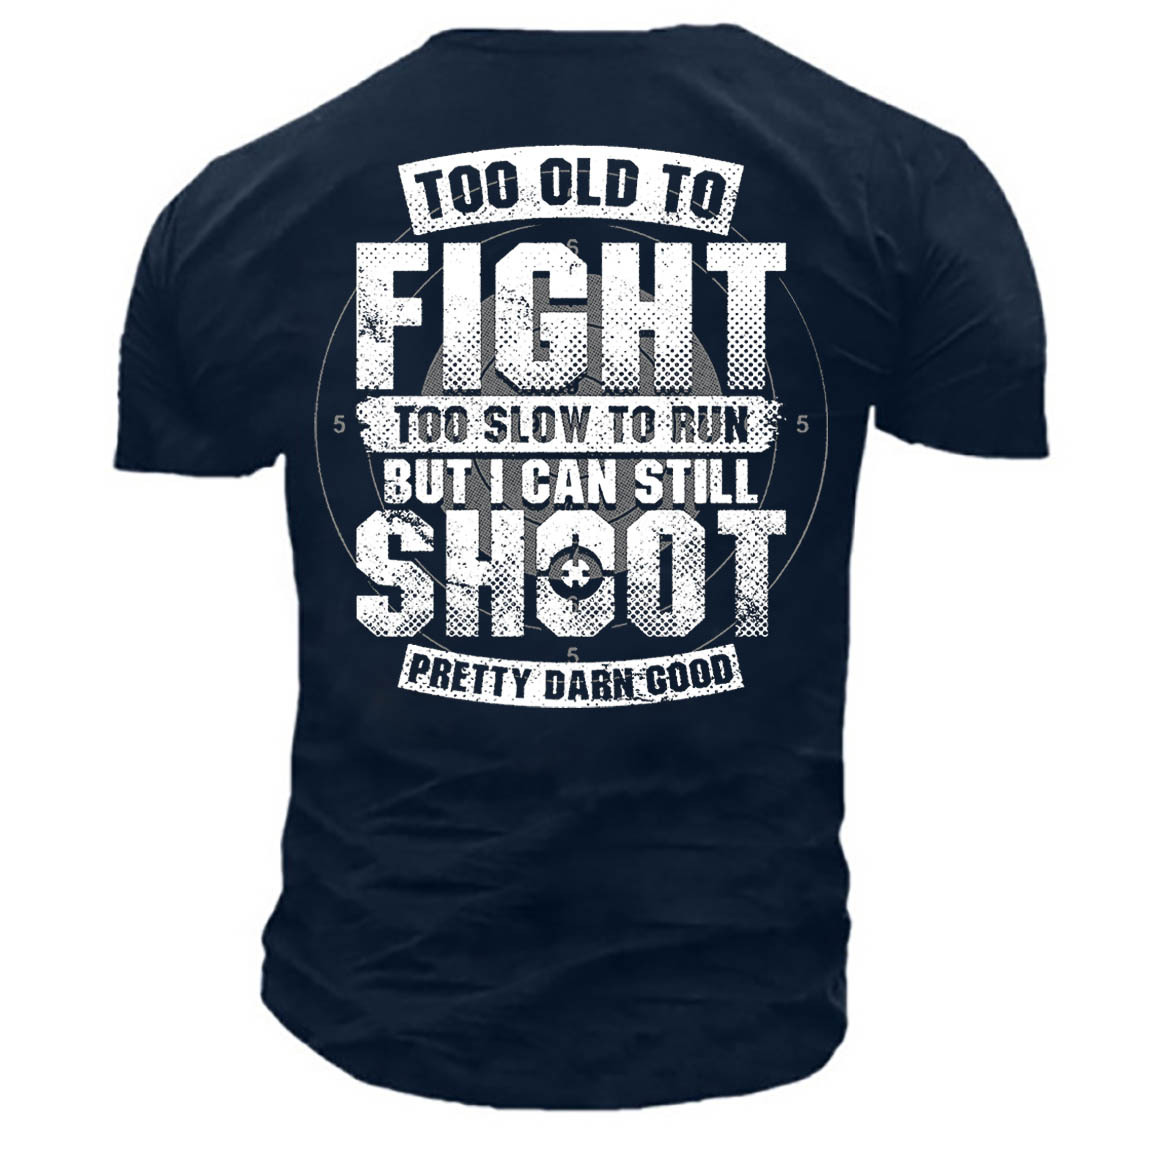 Men's Outdoor Too Old Chic To Fight Shoot Cotton T-shirt